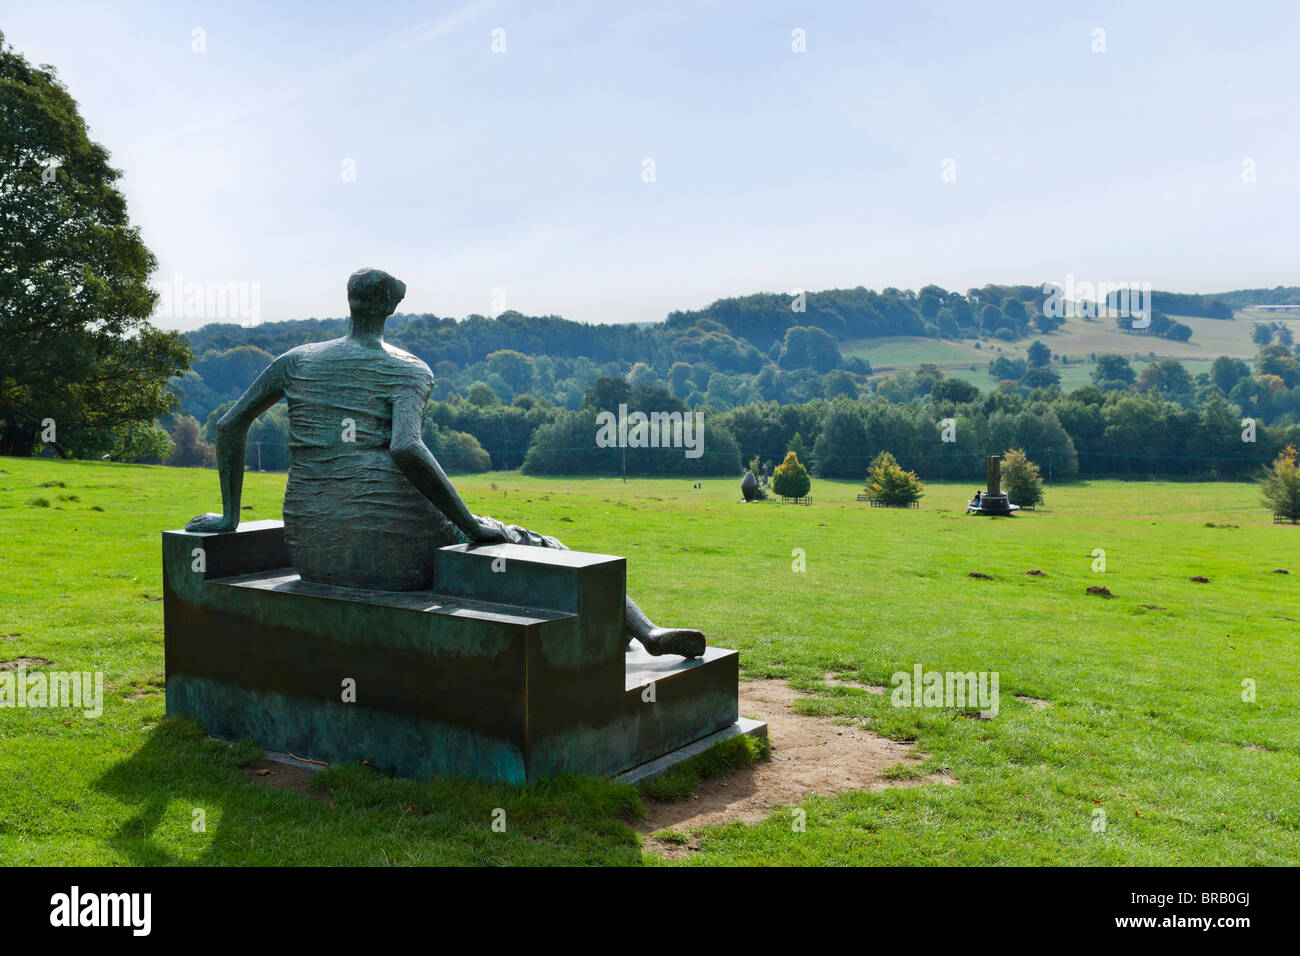 Yorkshire Sculpture Park with Henry Moore's "Draped Seated Woman" in the foreground, Wakefield, West Yorkshire, England, UK Stock Photo